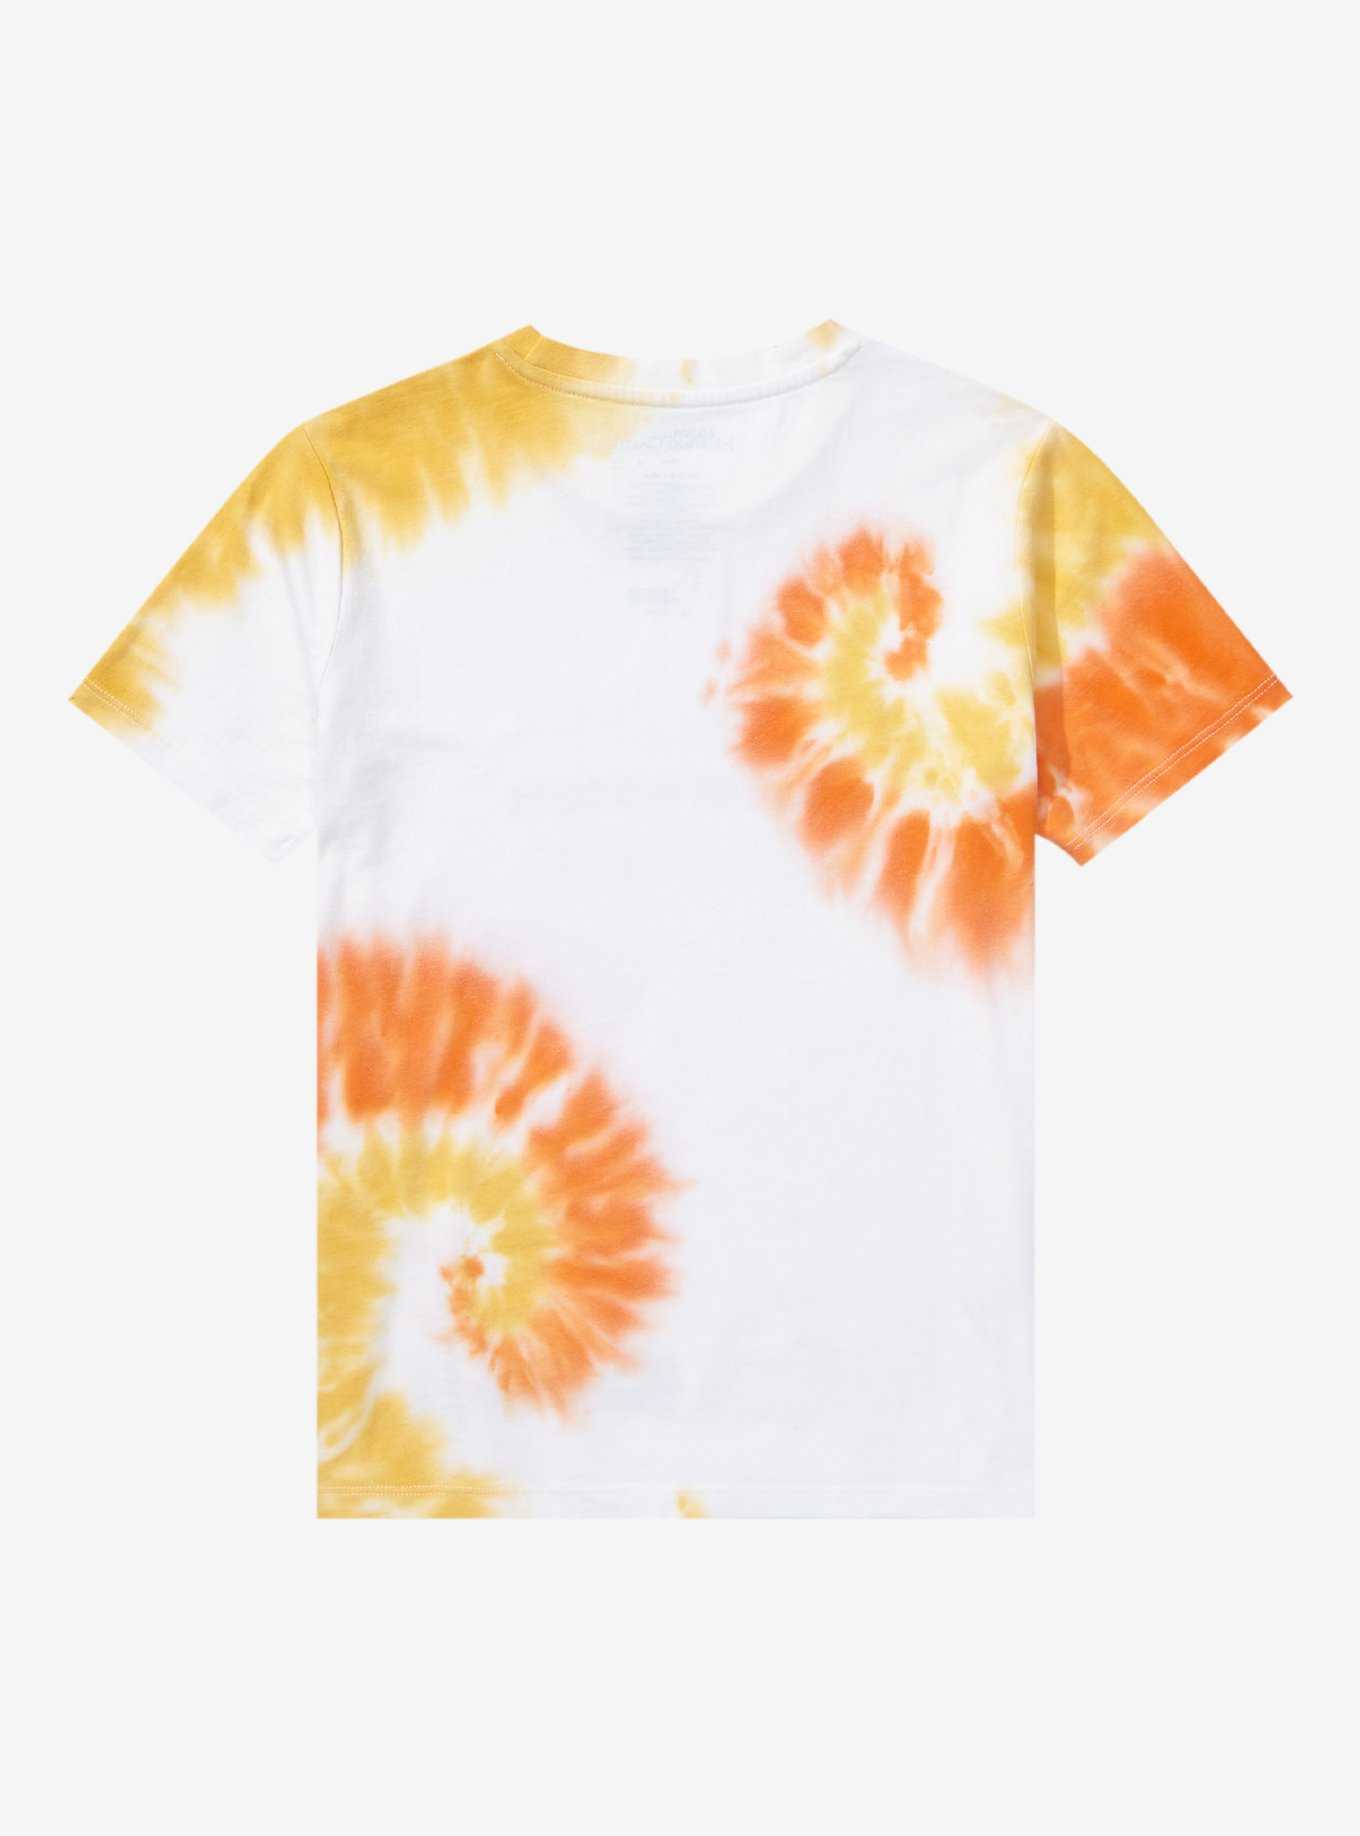 Studio Ghibli Howl's Moving Castle Calcifer Tie-Dye Youth T-Shirt - BoxLunch Exclusive, , hi-res